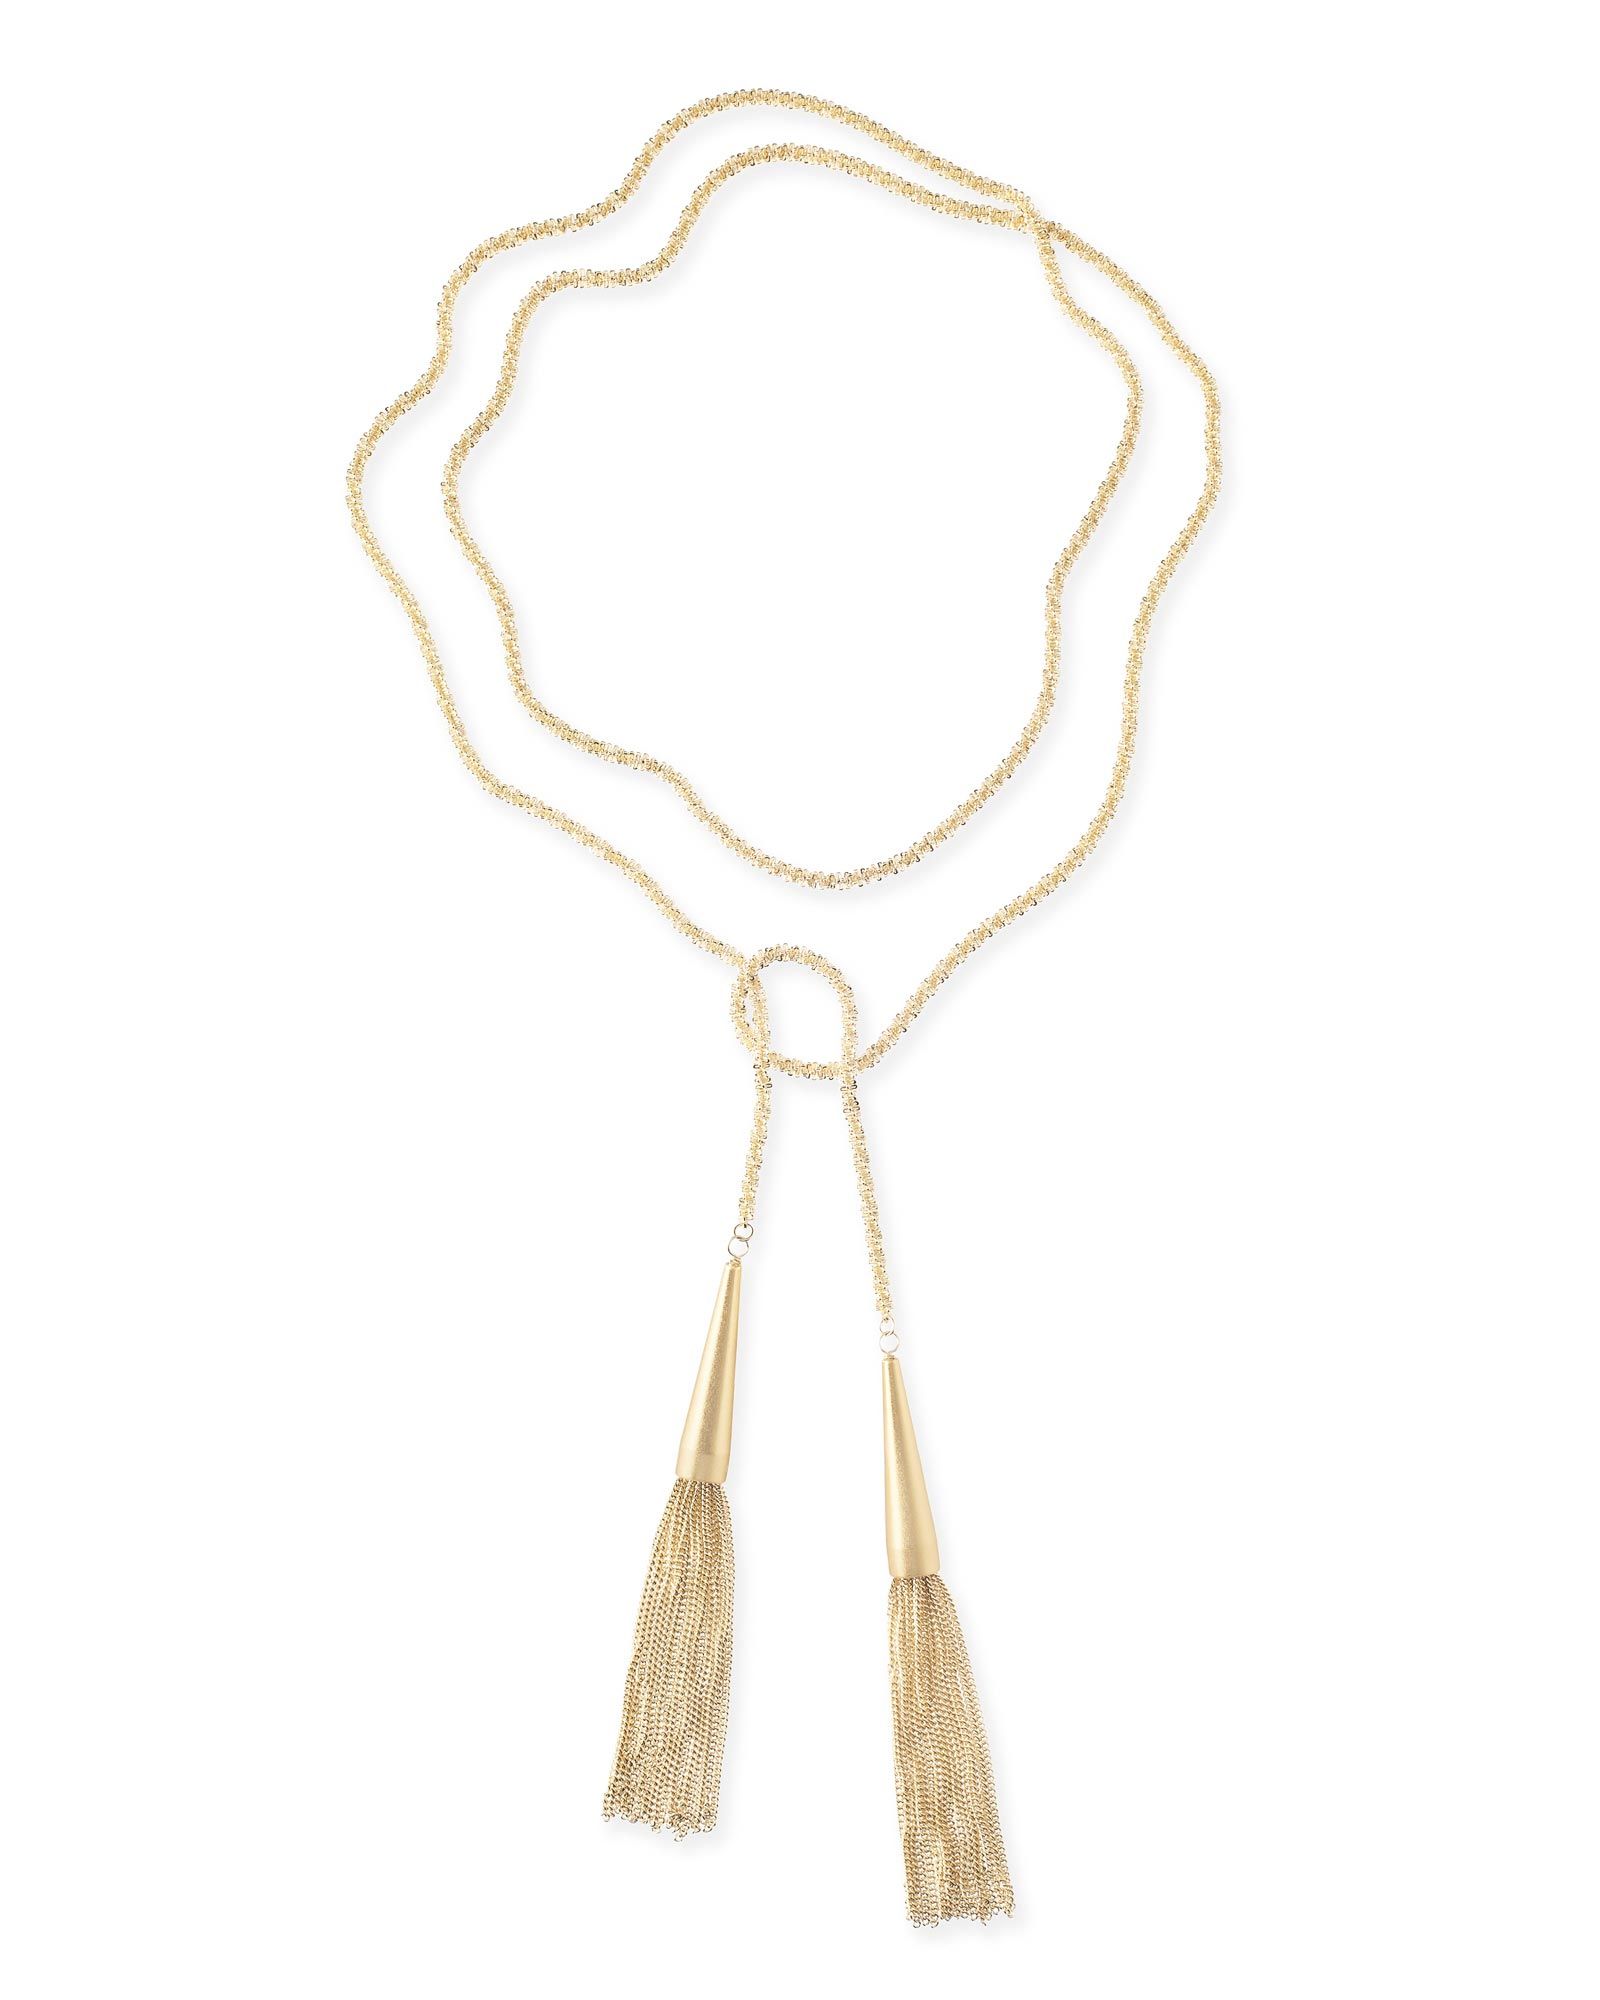 Phara Necklace in Gold | Kendra Scott